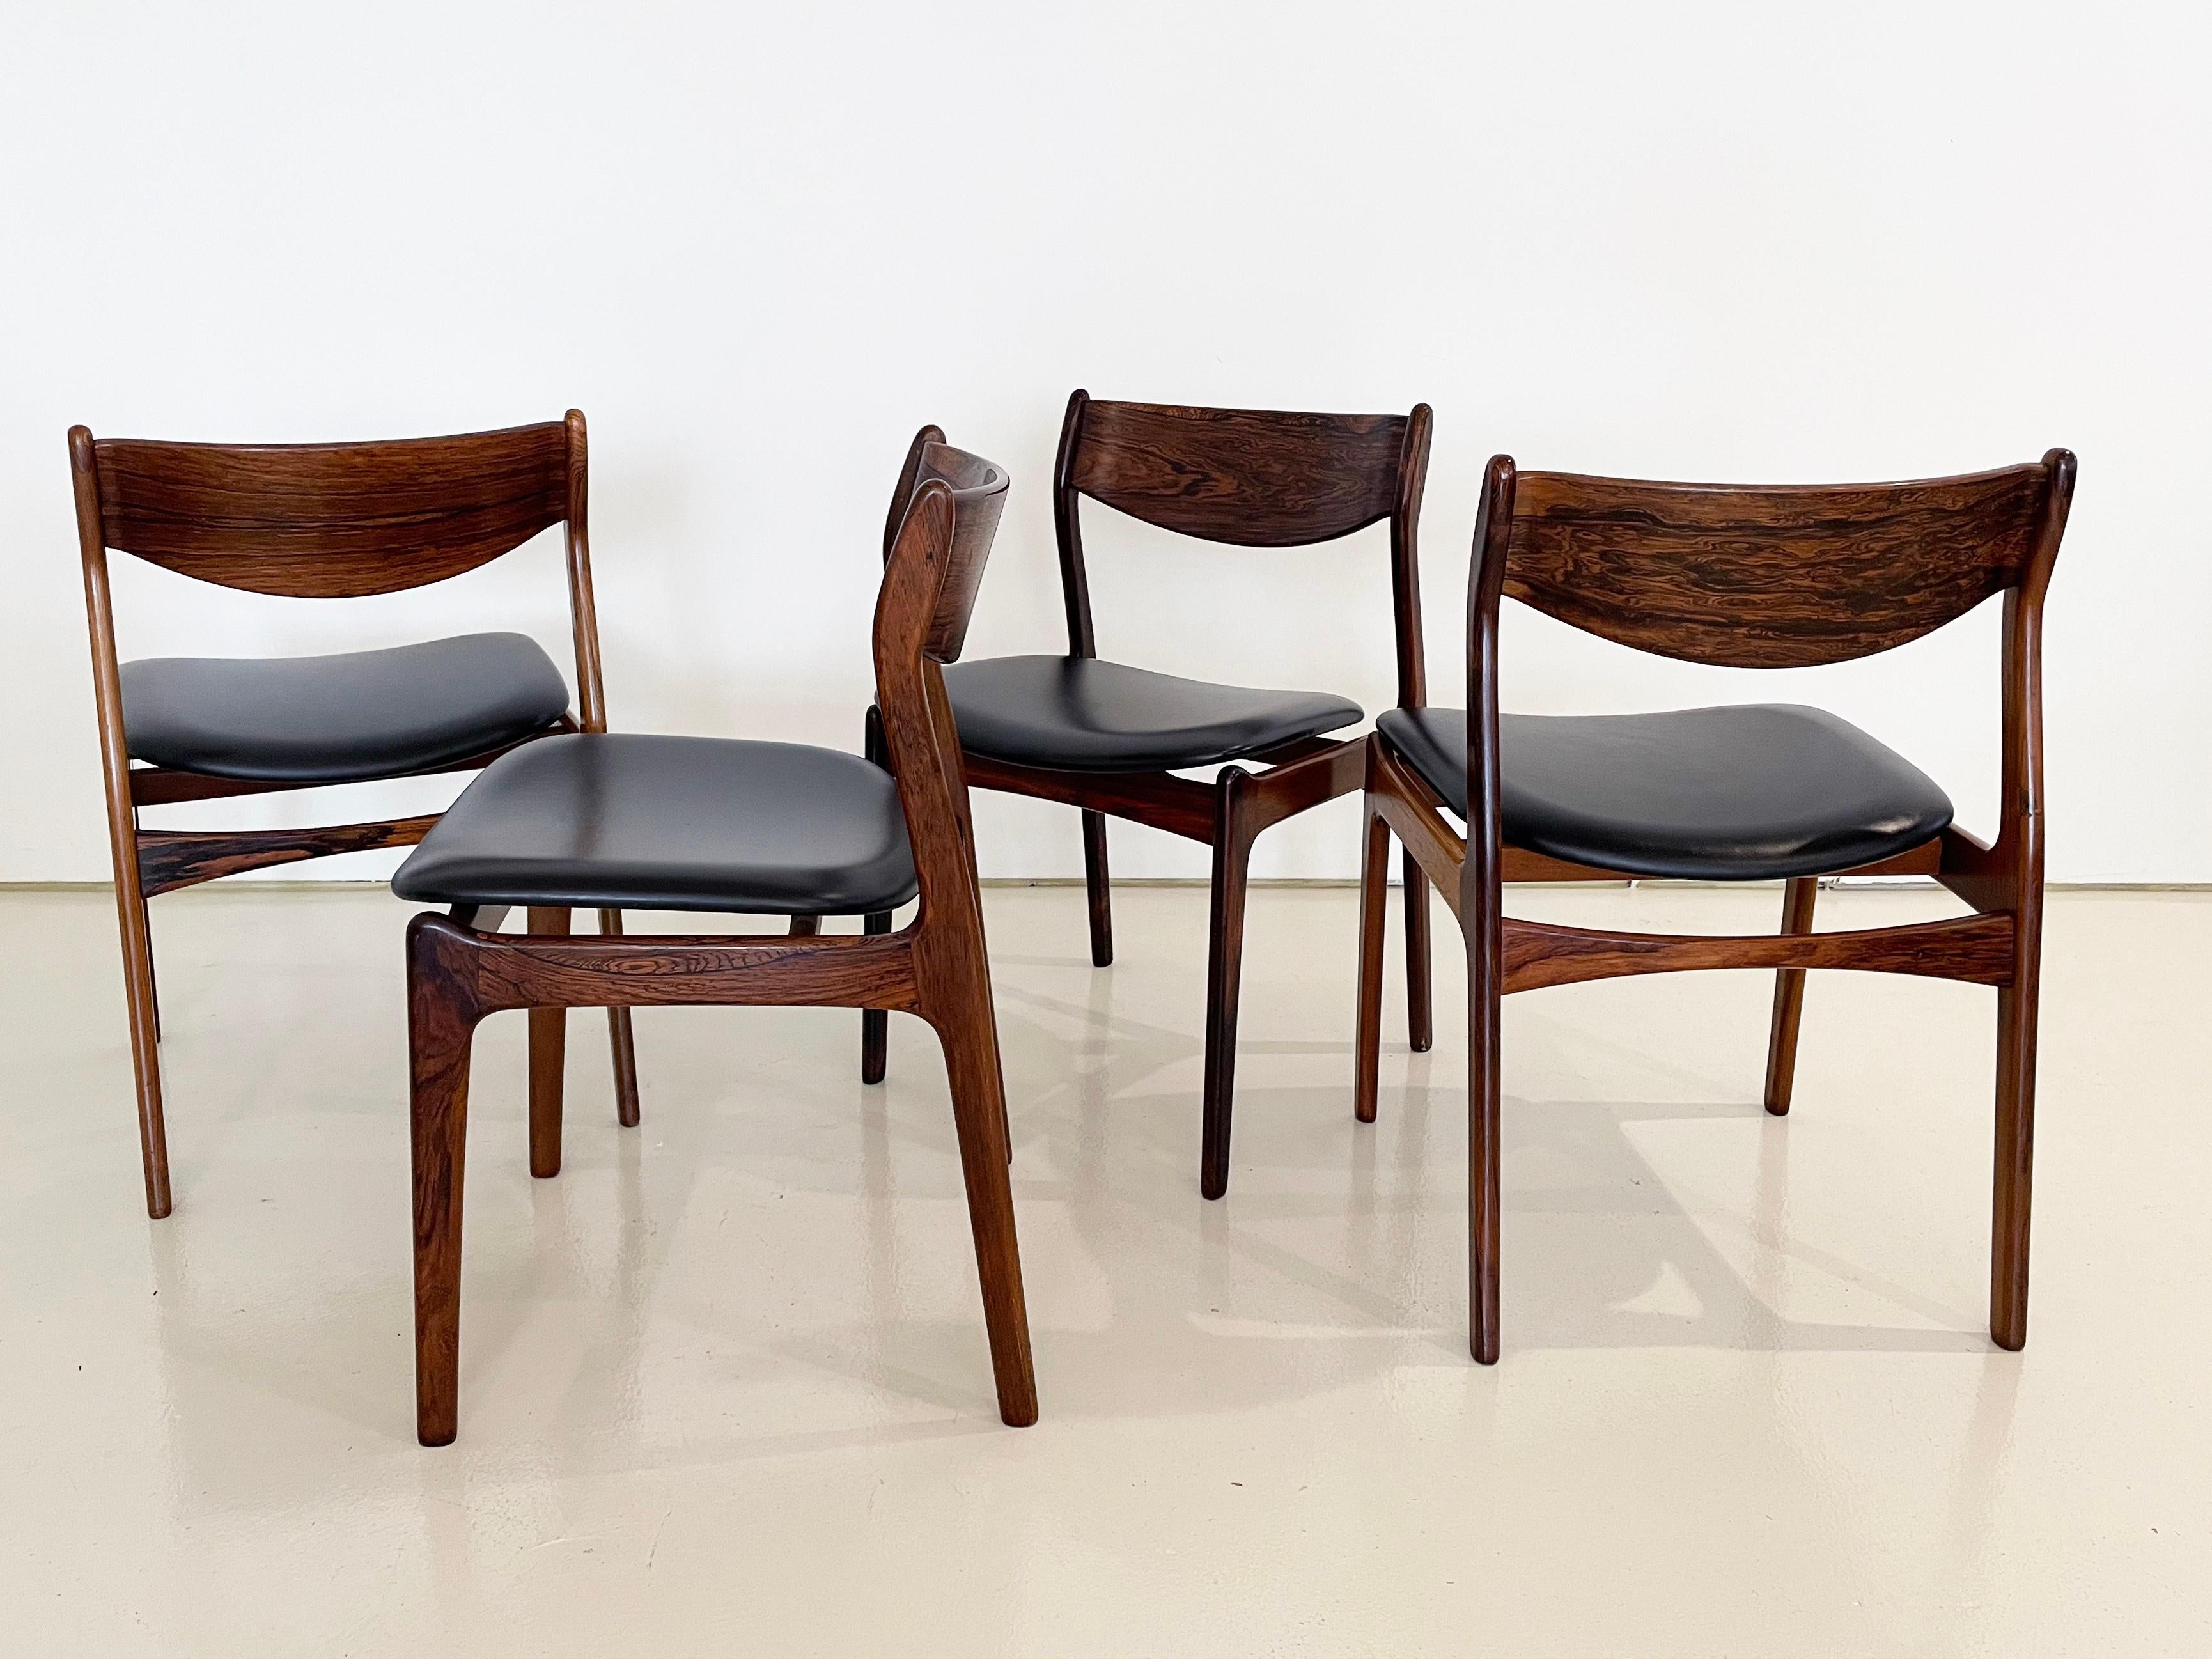 Vintage Mid-century Danish Dining Chairs, Designed by P.E. Jorgensen, Set of 8 For Sale 7